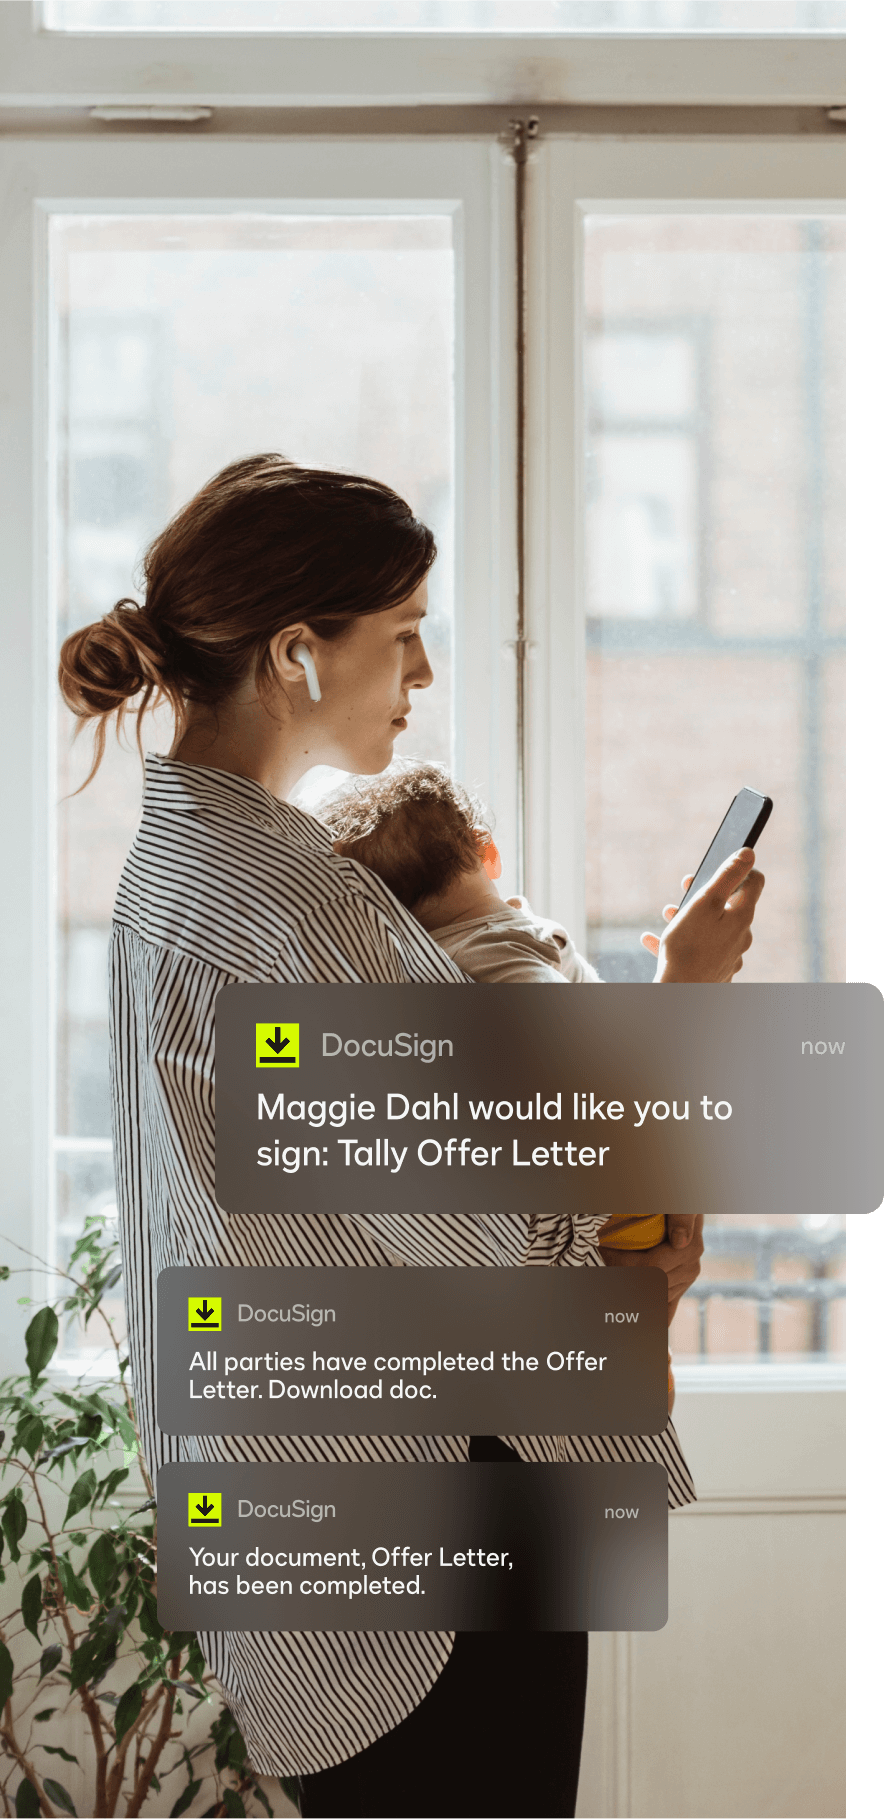 Phone notifications from DocuSign showing that an employer would like the user to sign the offer letter, the offer letter has been completed by all parties, and the document is available to download.